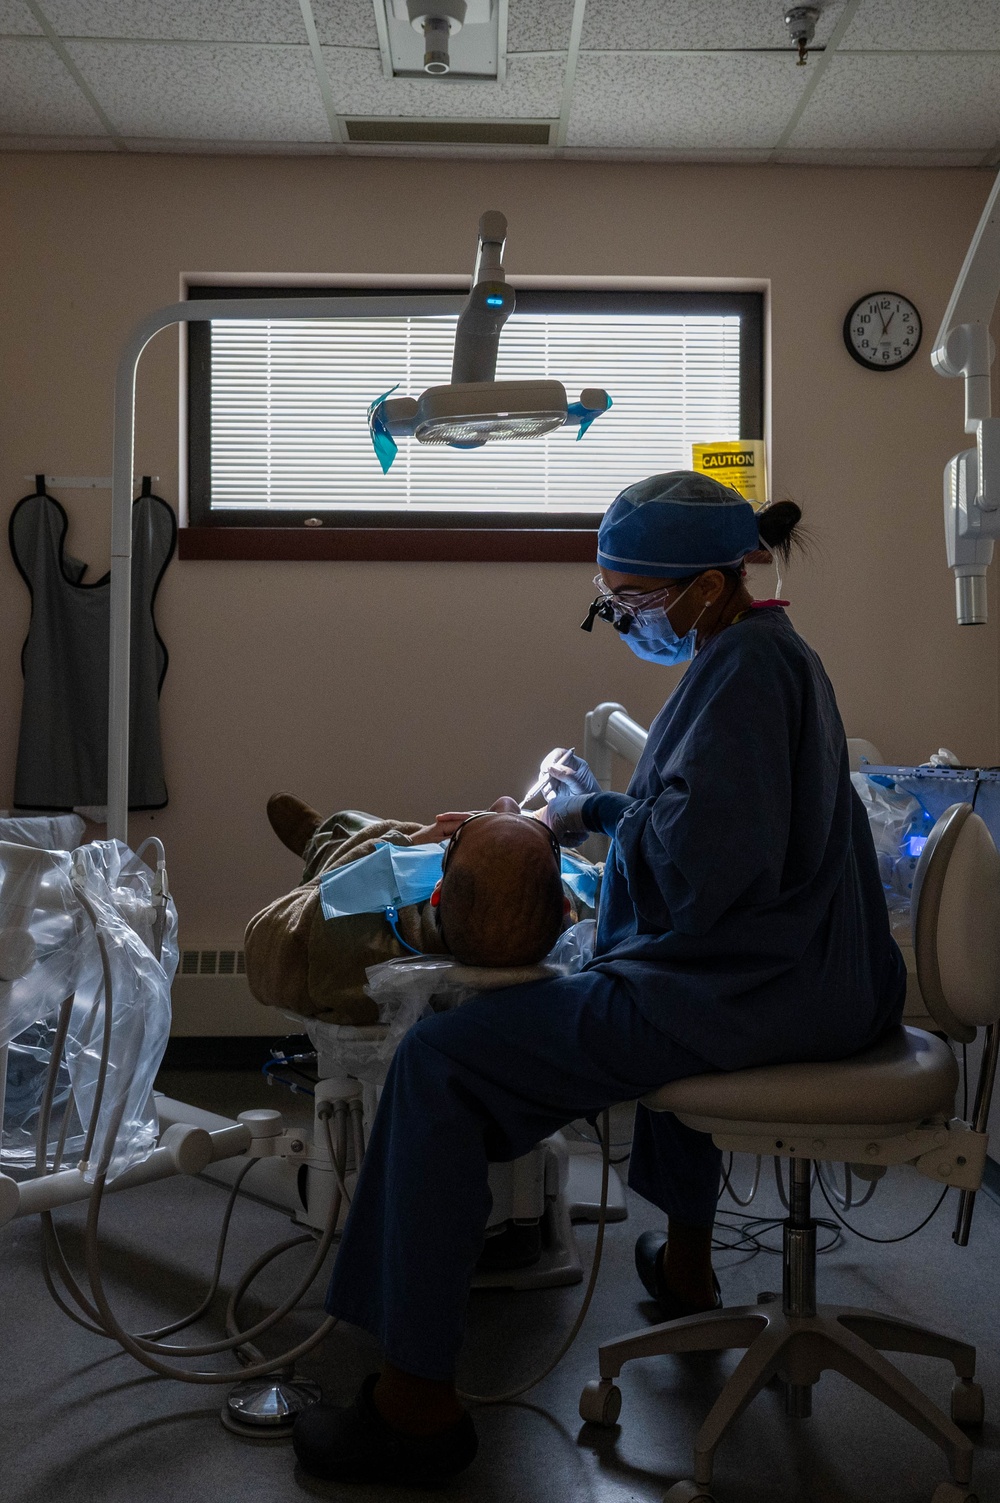 &quot;Filling&quot; in the role: Eielson's sole dental hygienist does it all